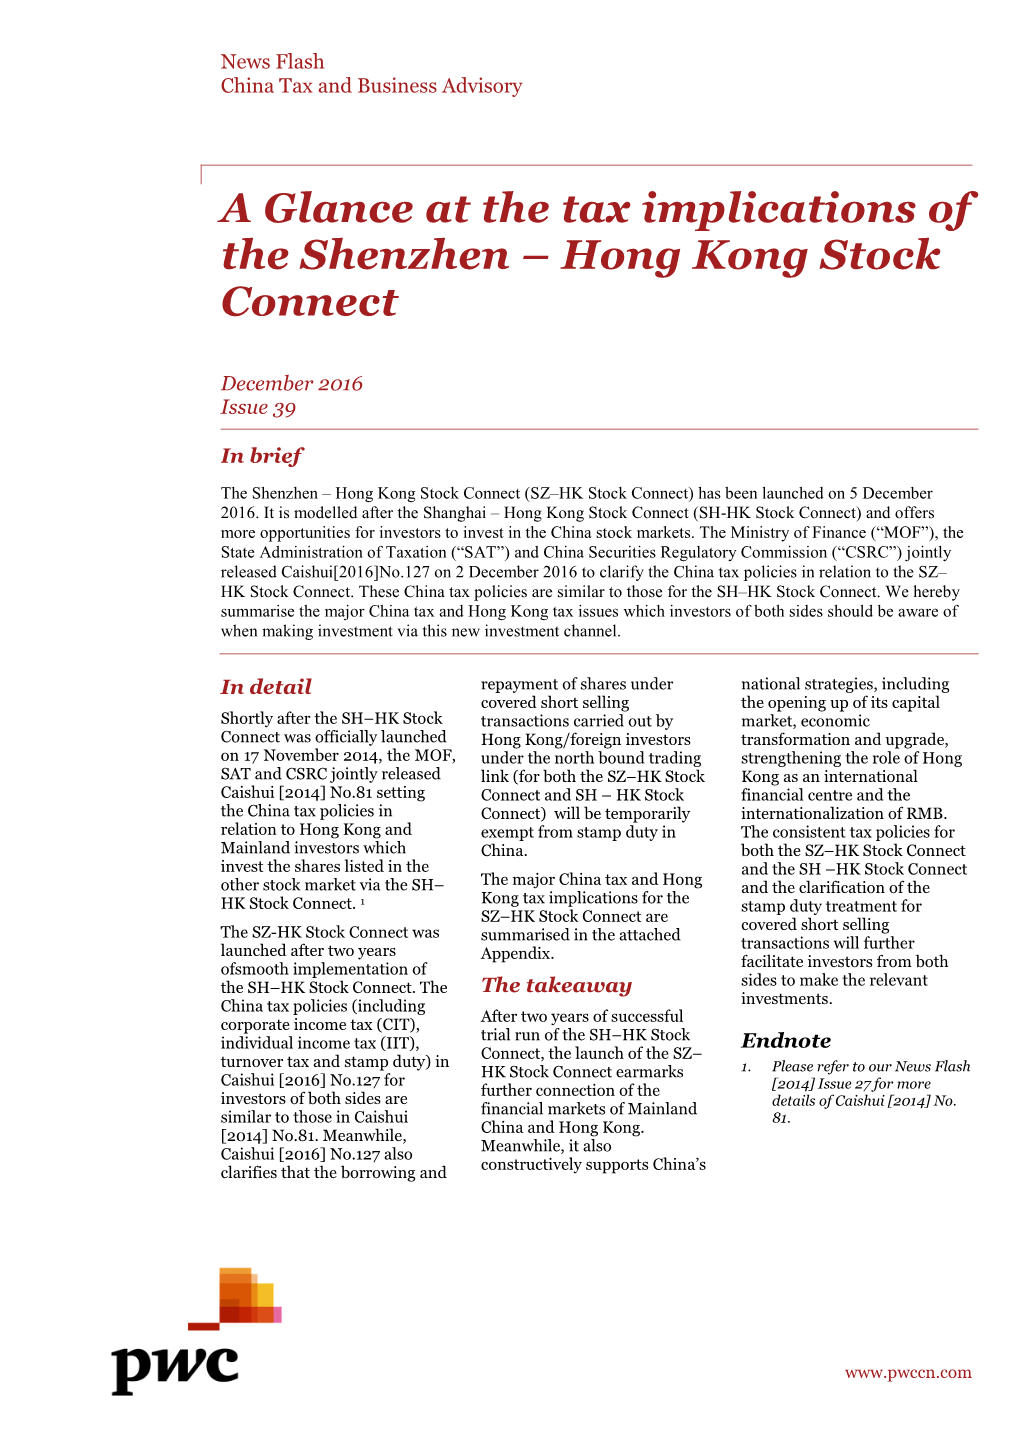 A Glance at the Tax Implications of the Shenzhen – Hong Kong Stock Connect